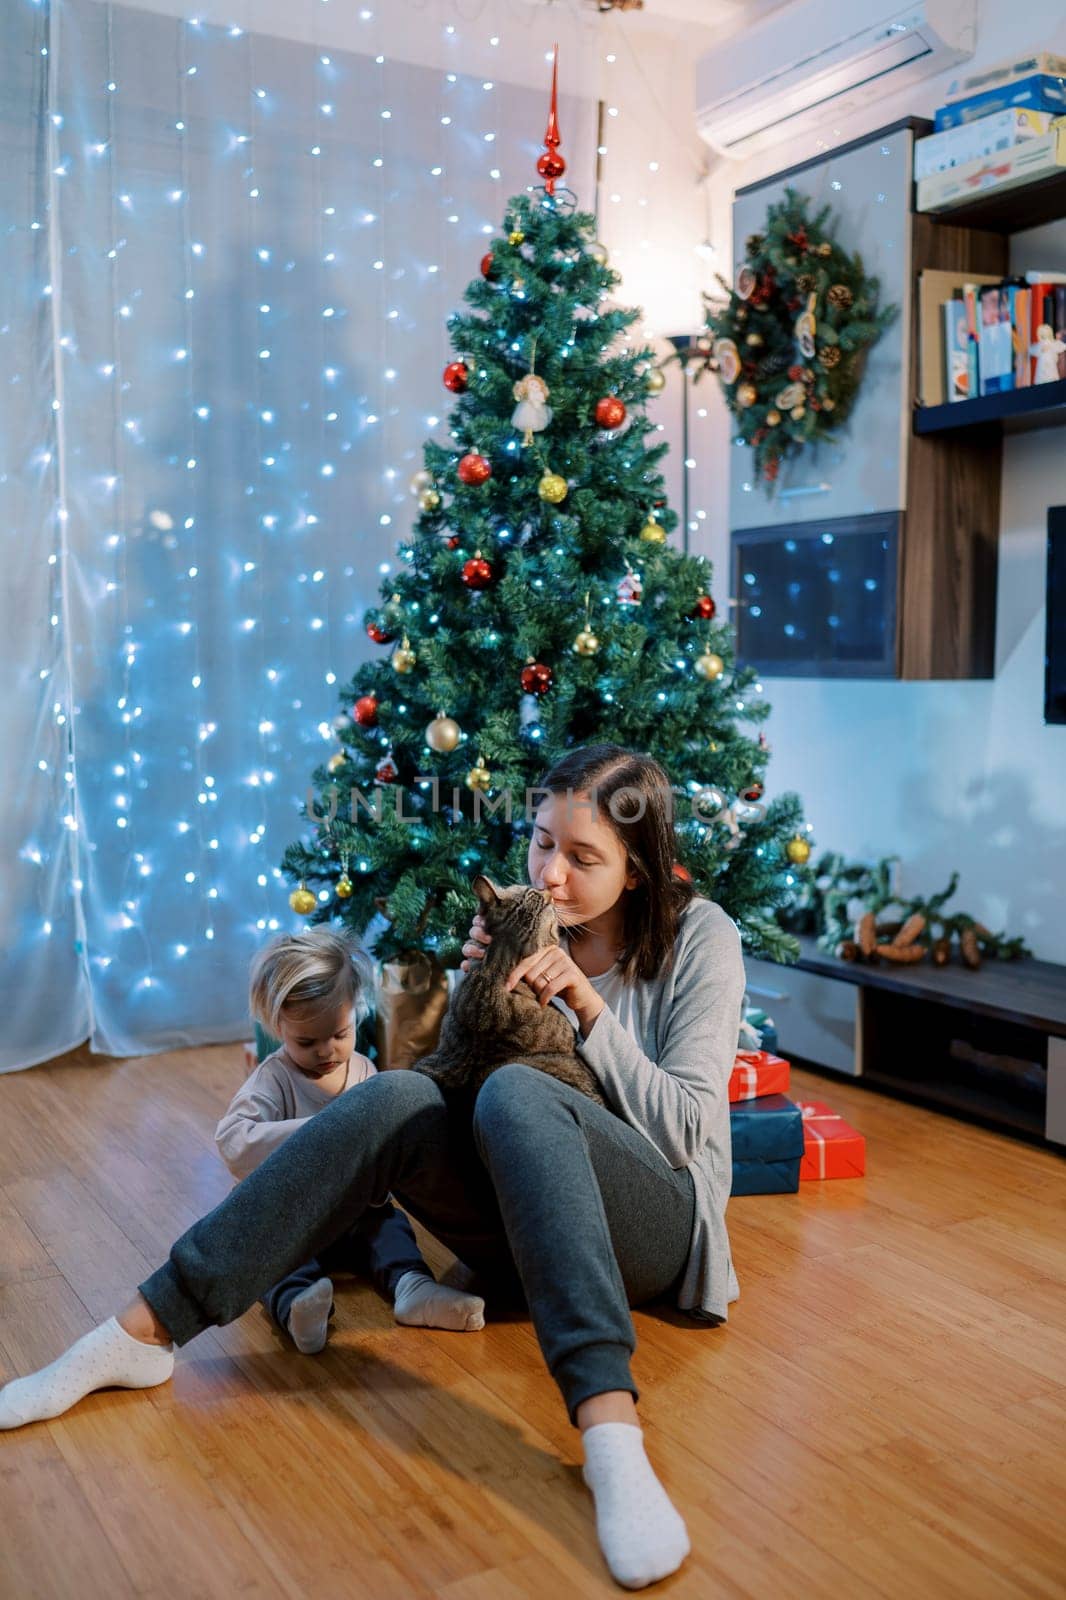 Mom pets a cat sitting on the floor with a little girl near the Christmas tree. High quality photo